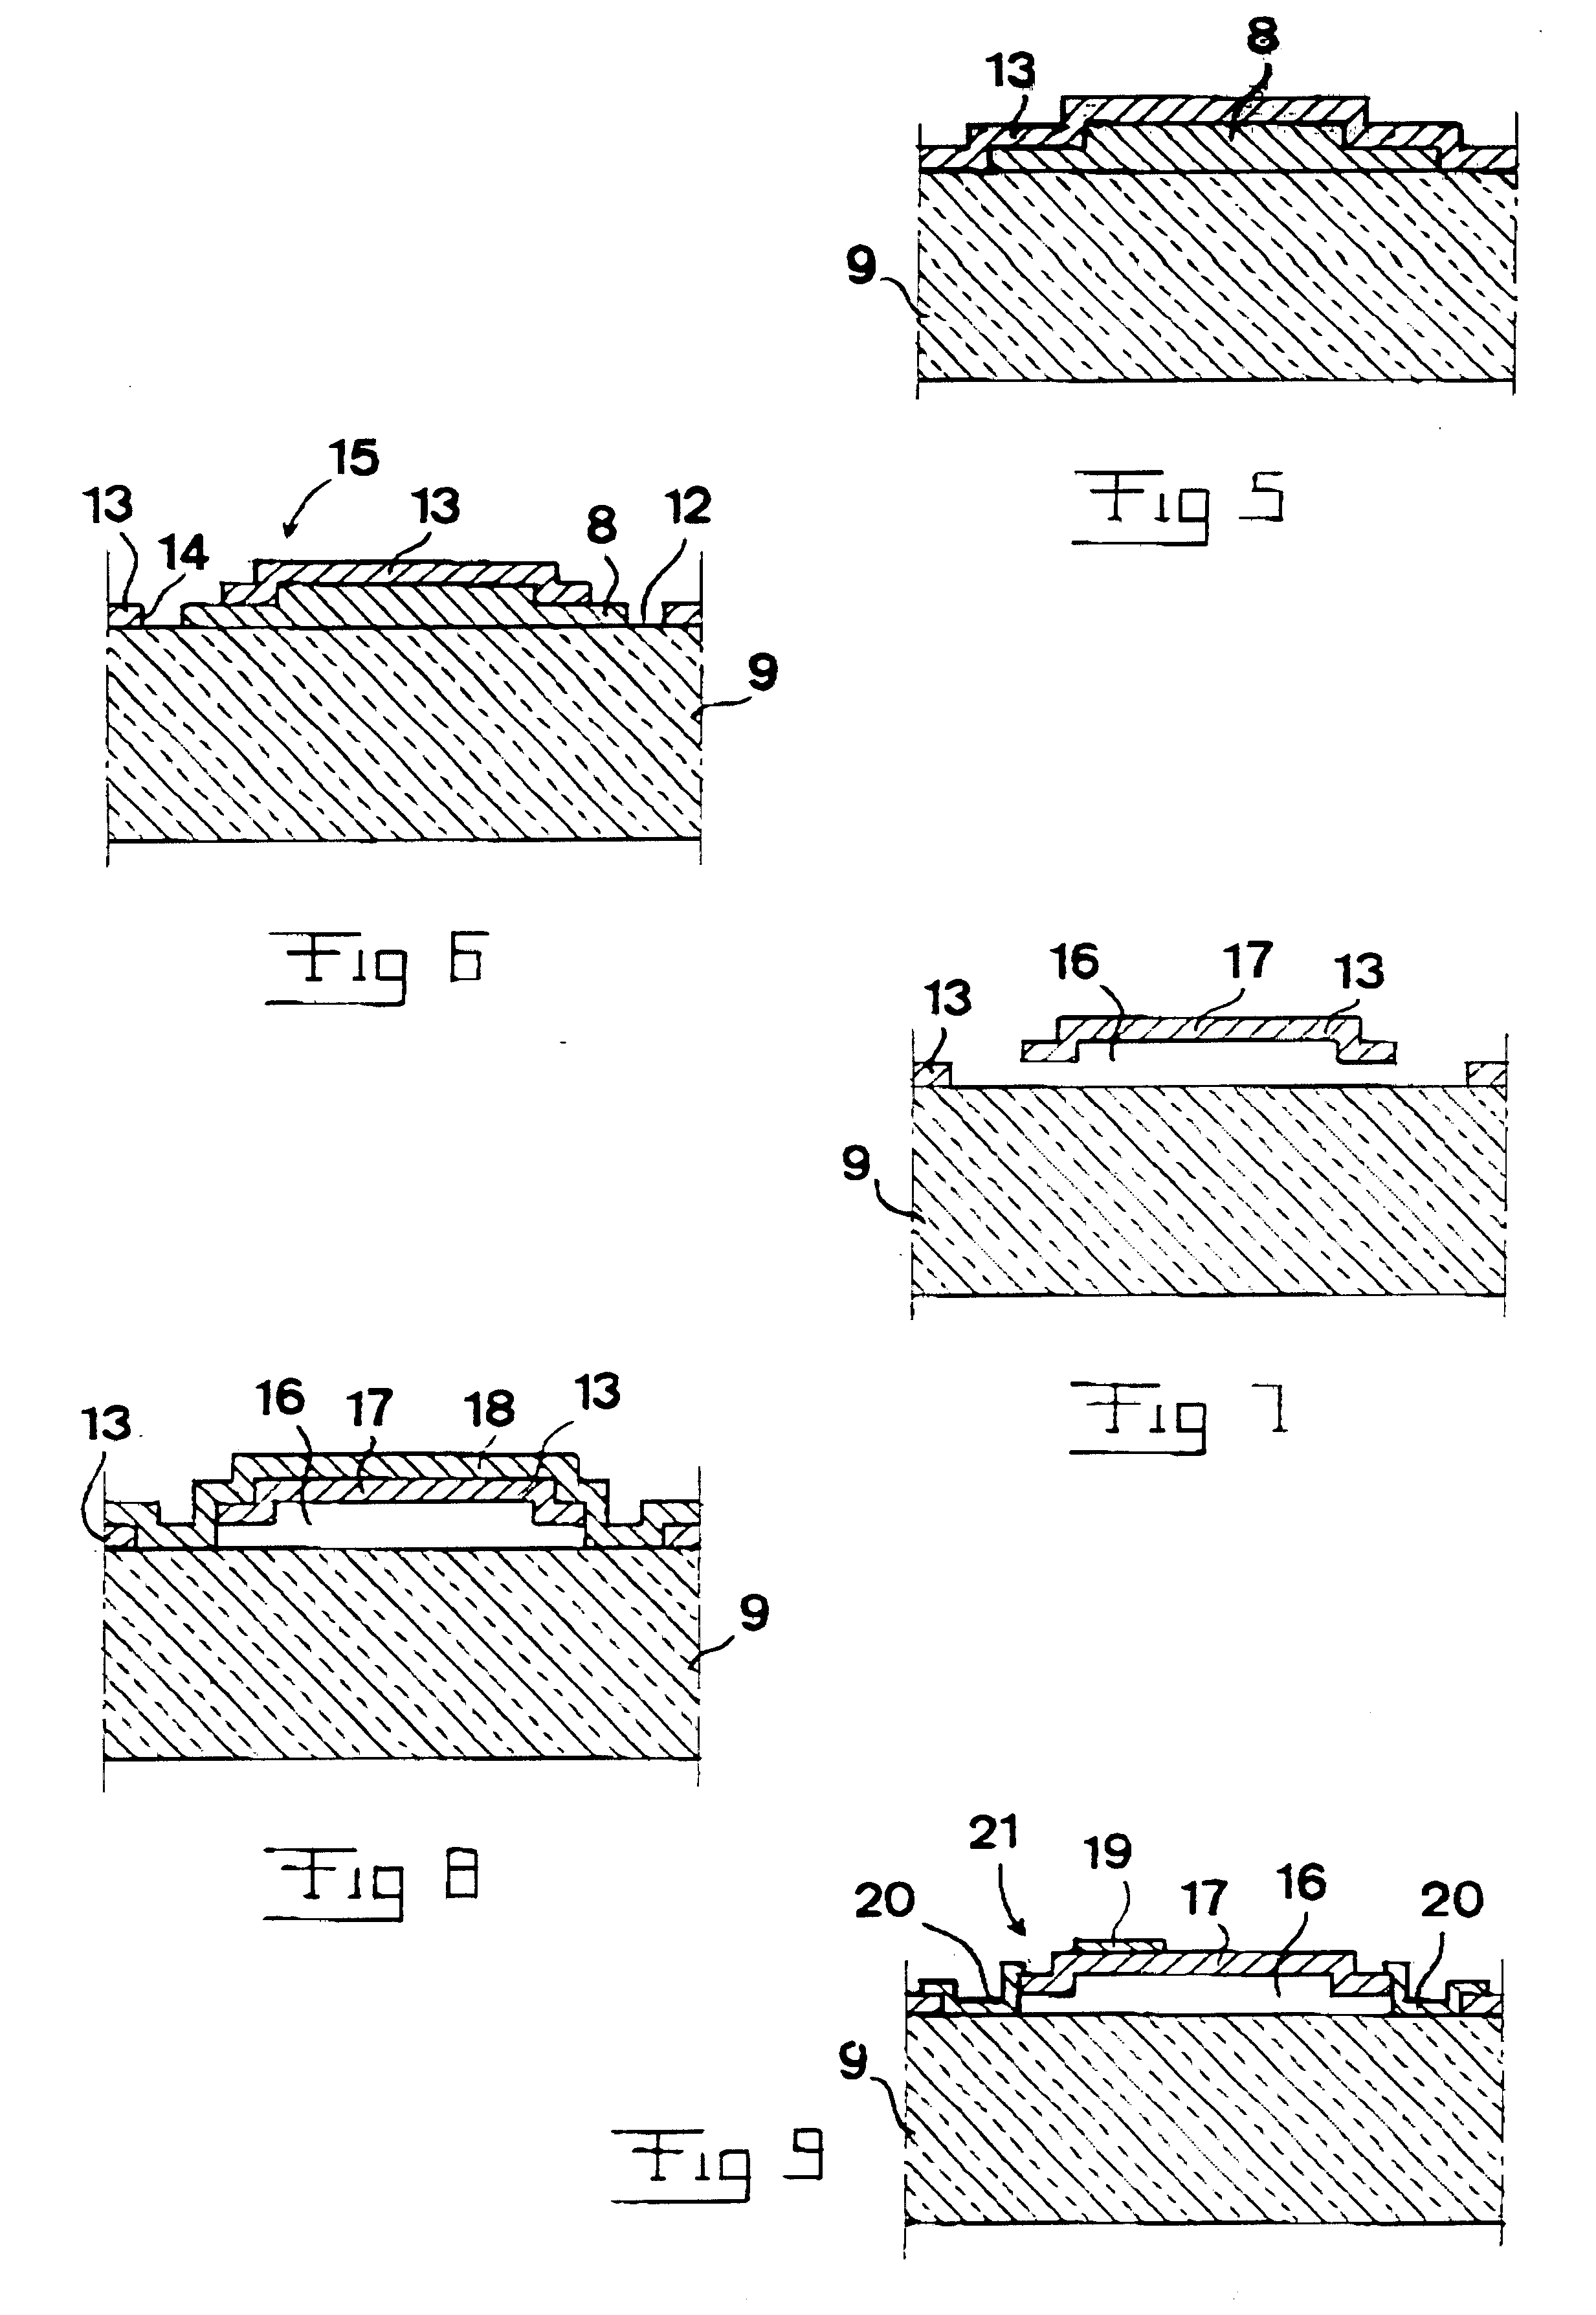 Method of producing a semiconductor device of SiC